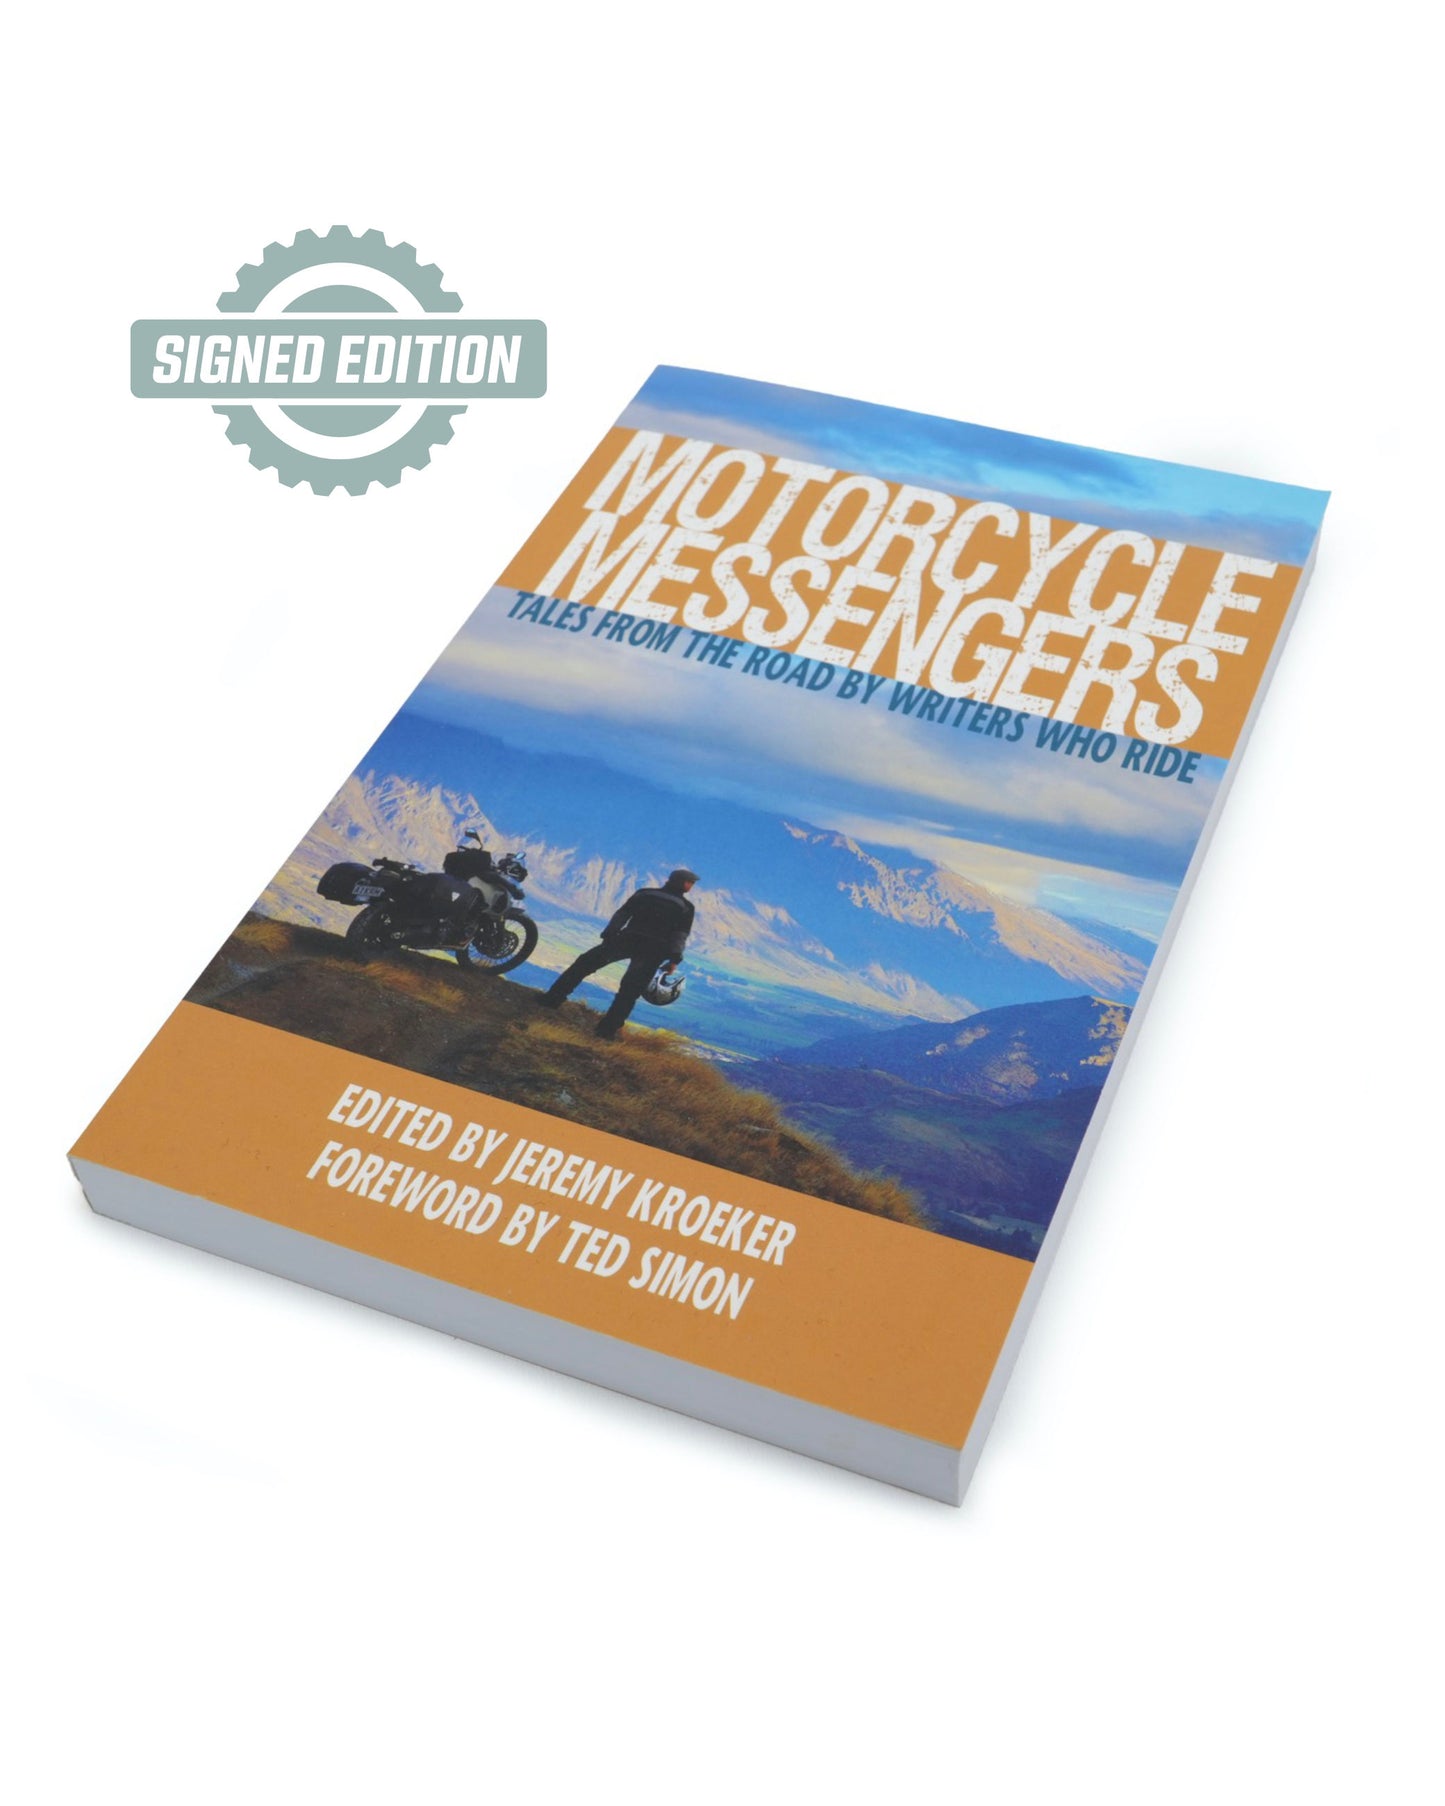 Motorcycle Messengers: Tales From The Road By Riders Who Ride - Jeremy Kroeker (Paperback) Signed